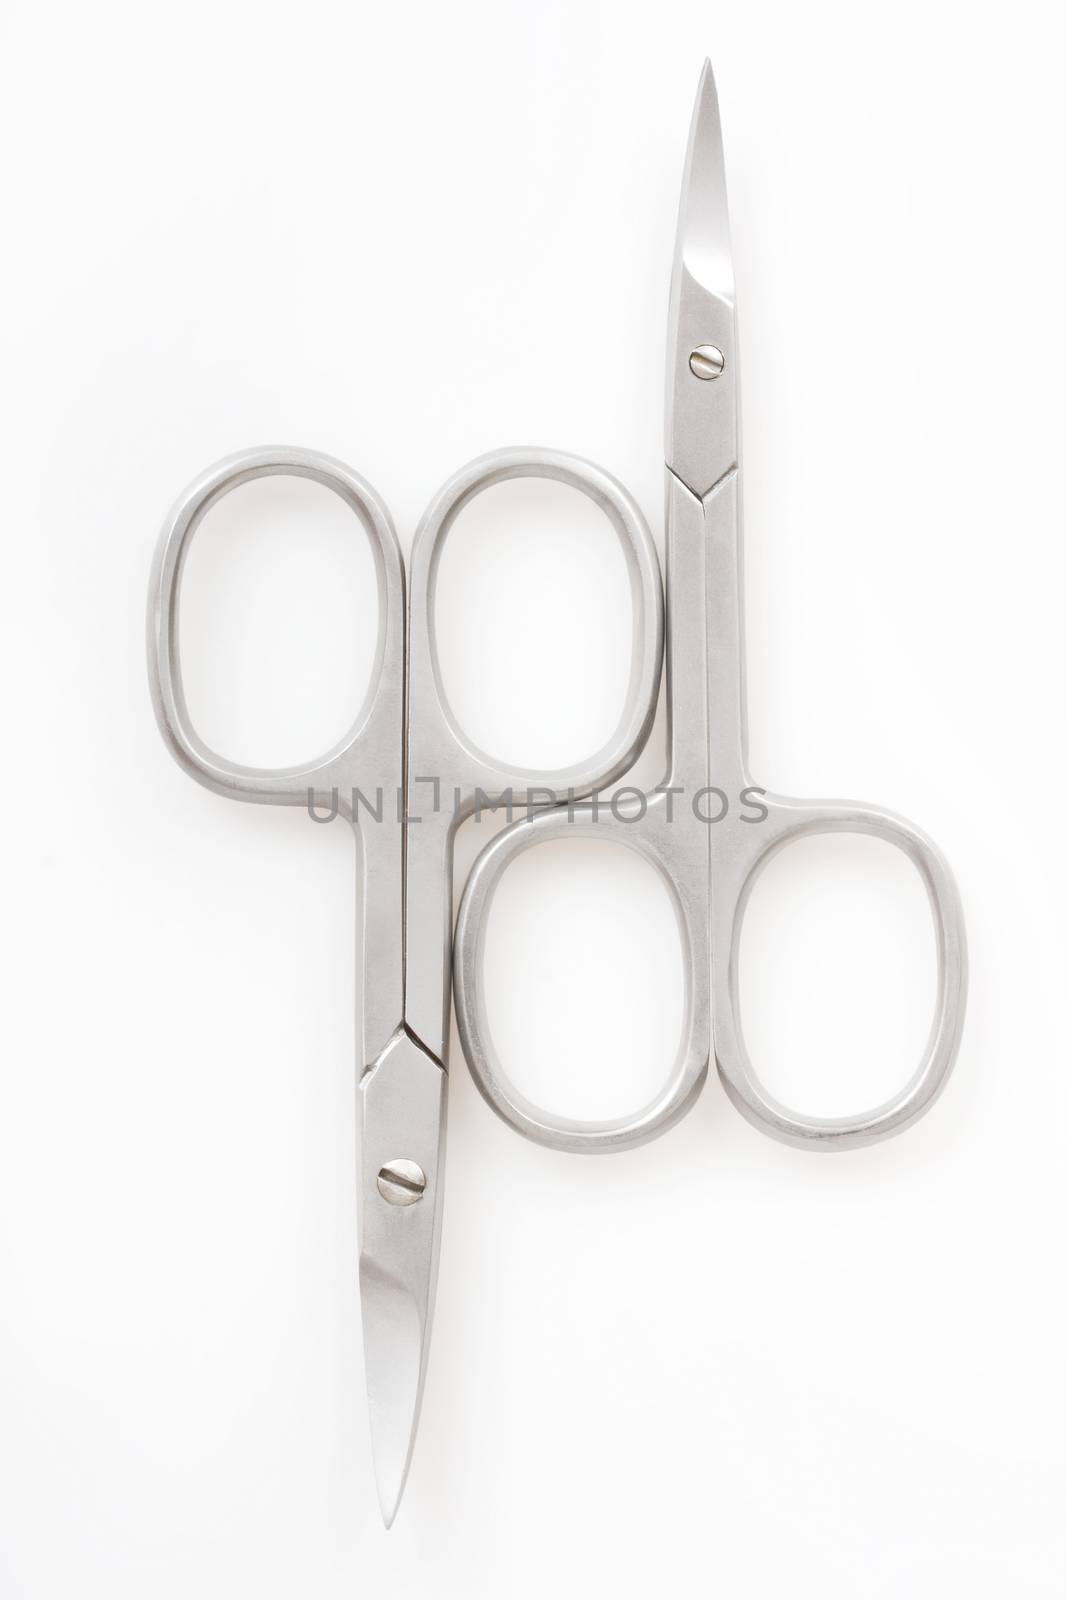 Two pairs of scissors on a white background